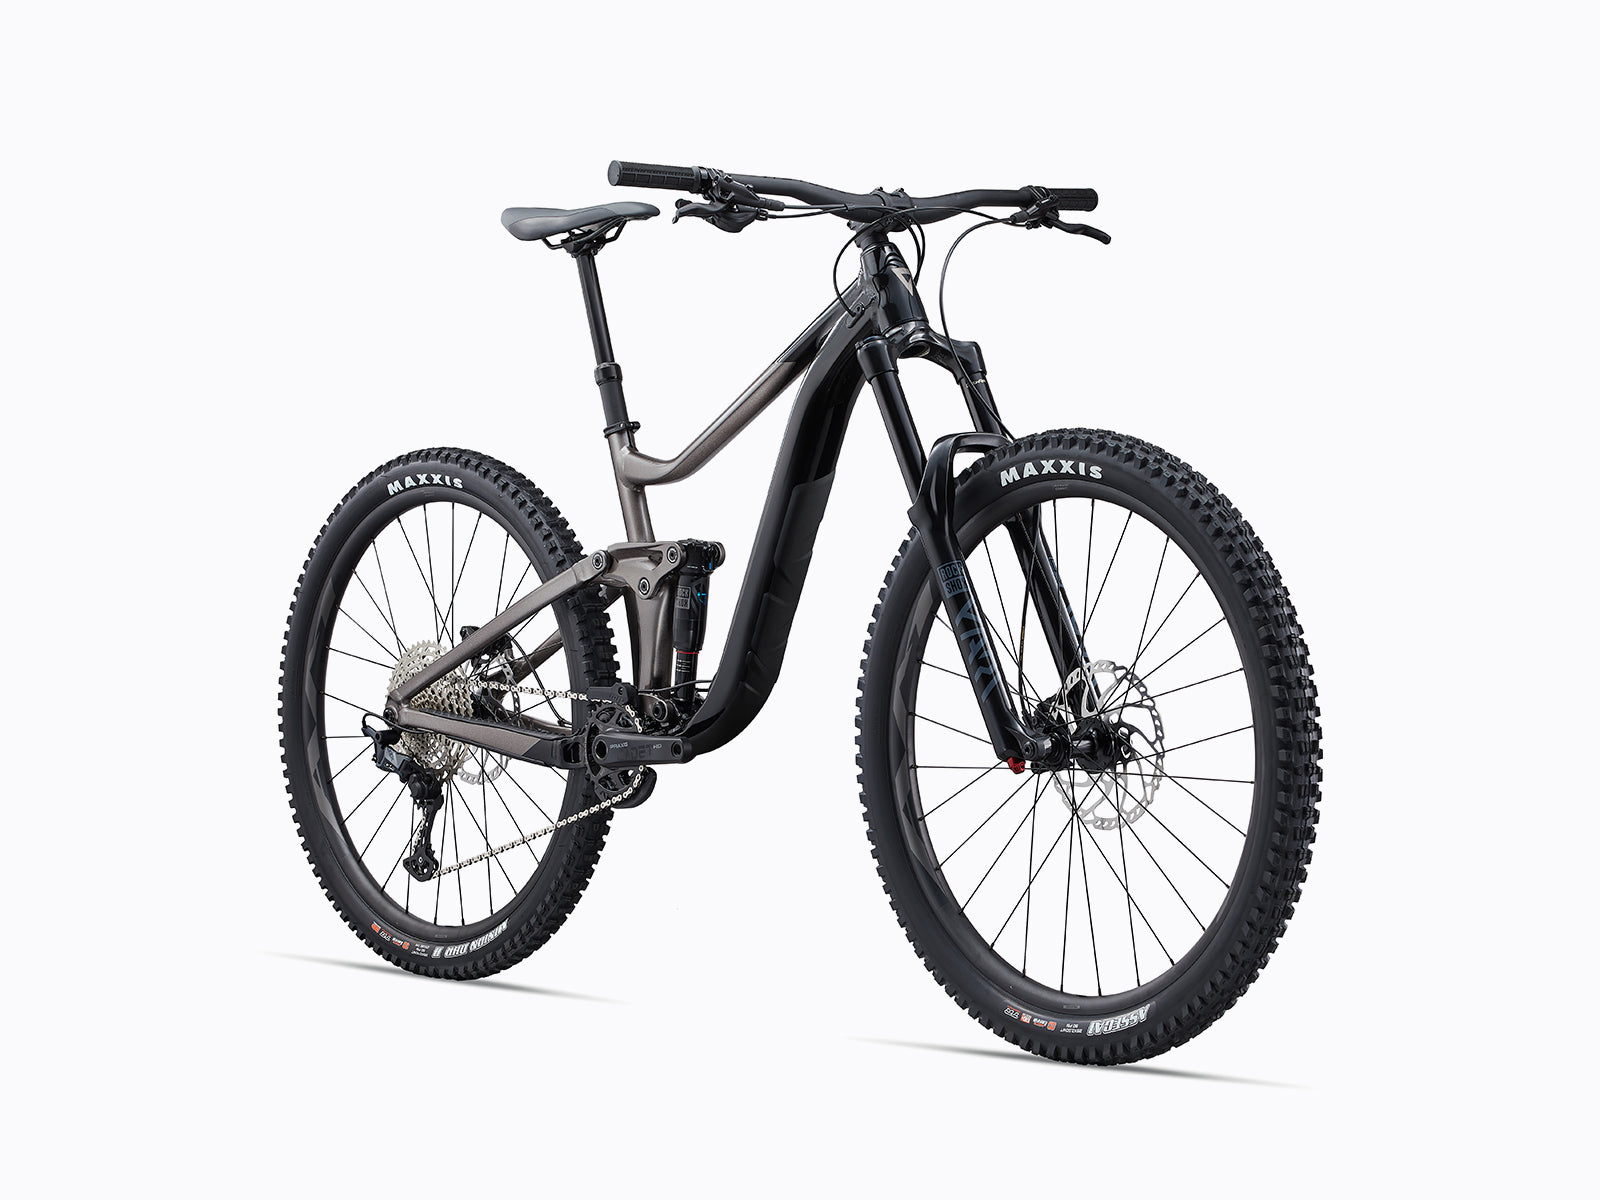 image features the giant reign 2, a mountain bike sold by Giant Melbourne, a bike shop in Melbourne Australia